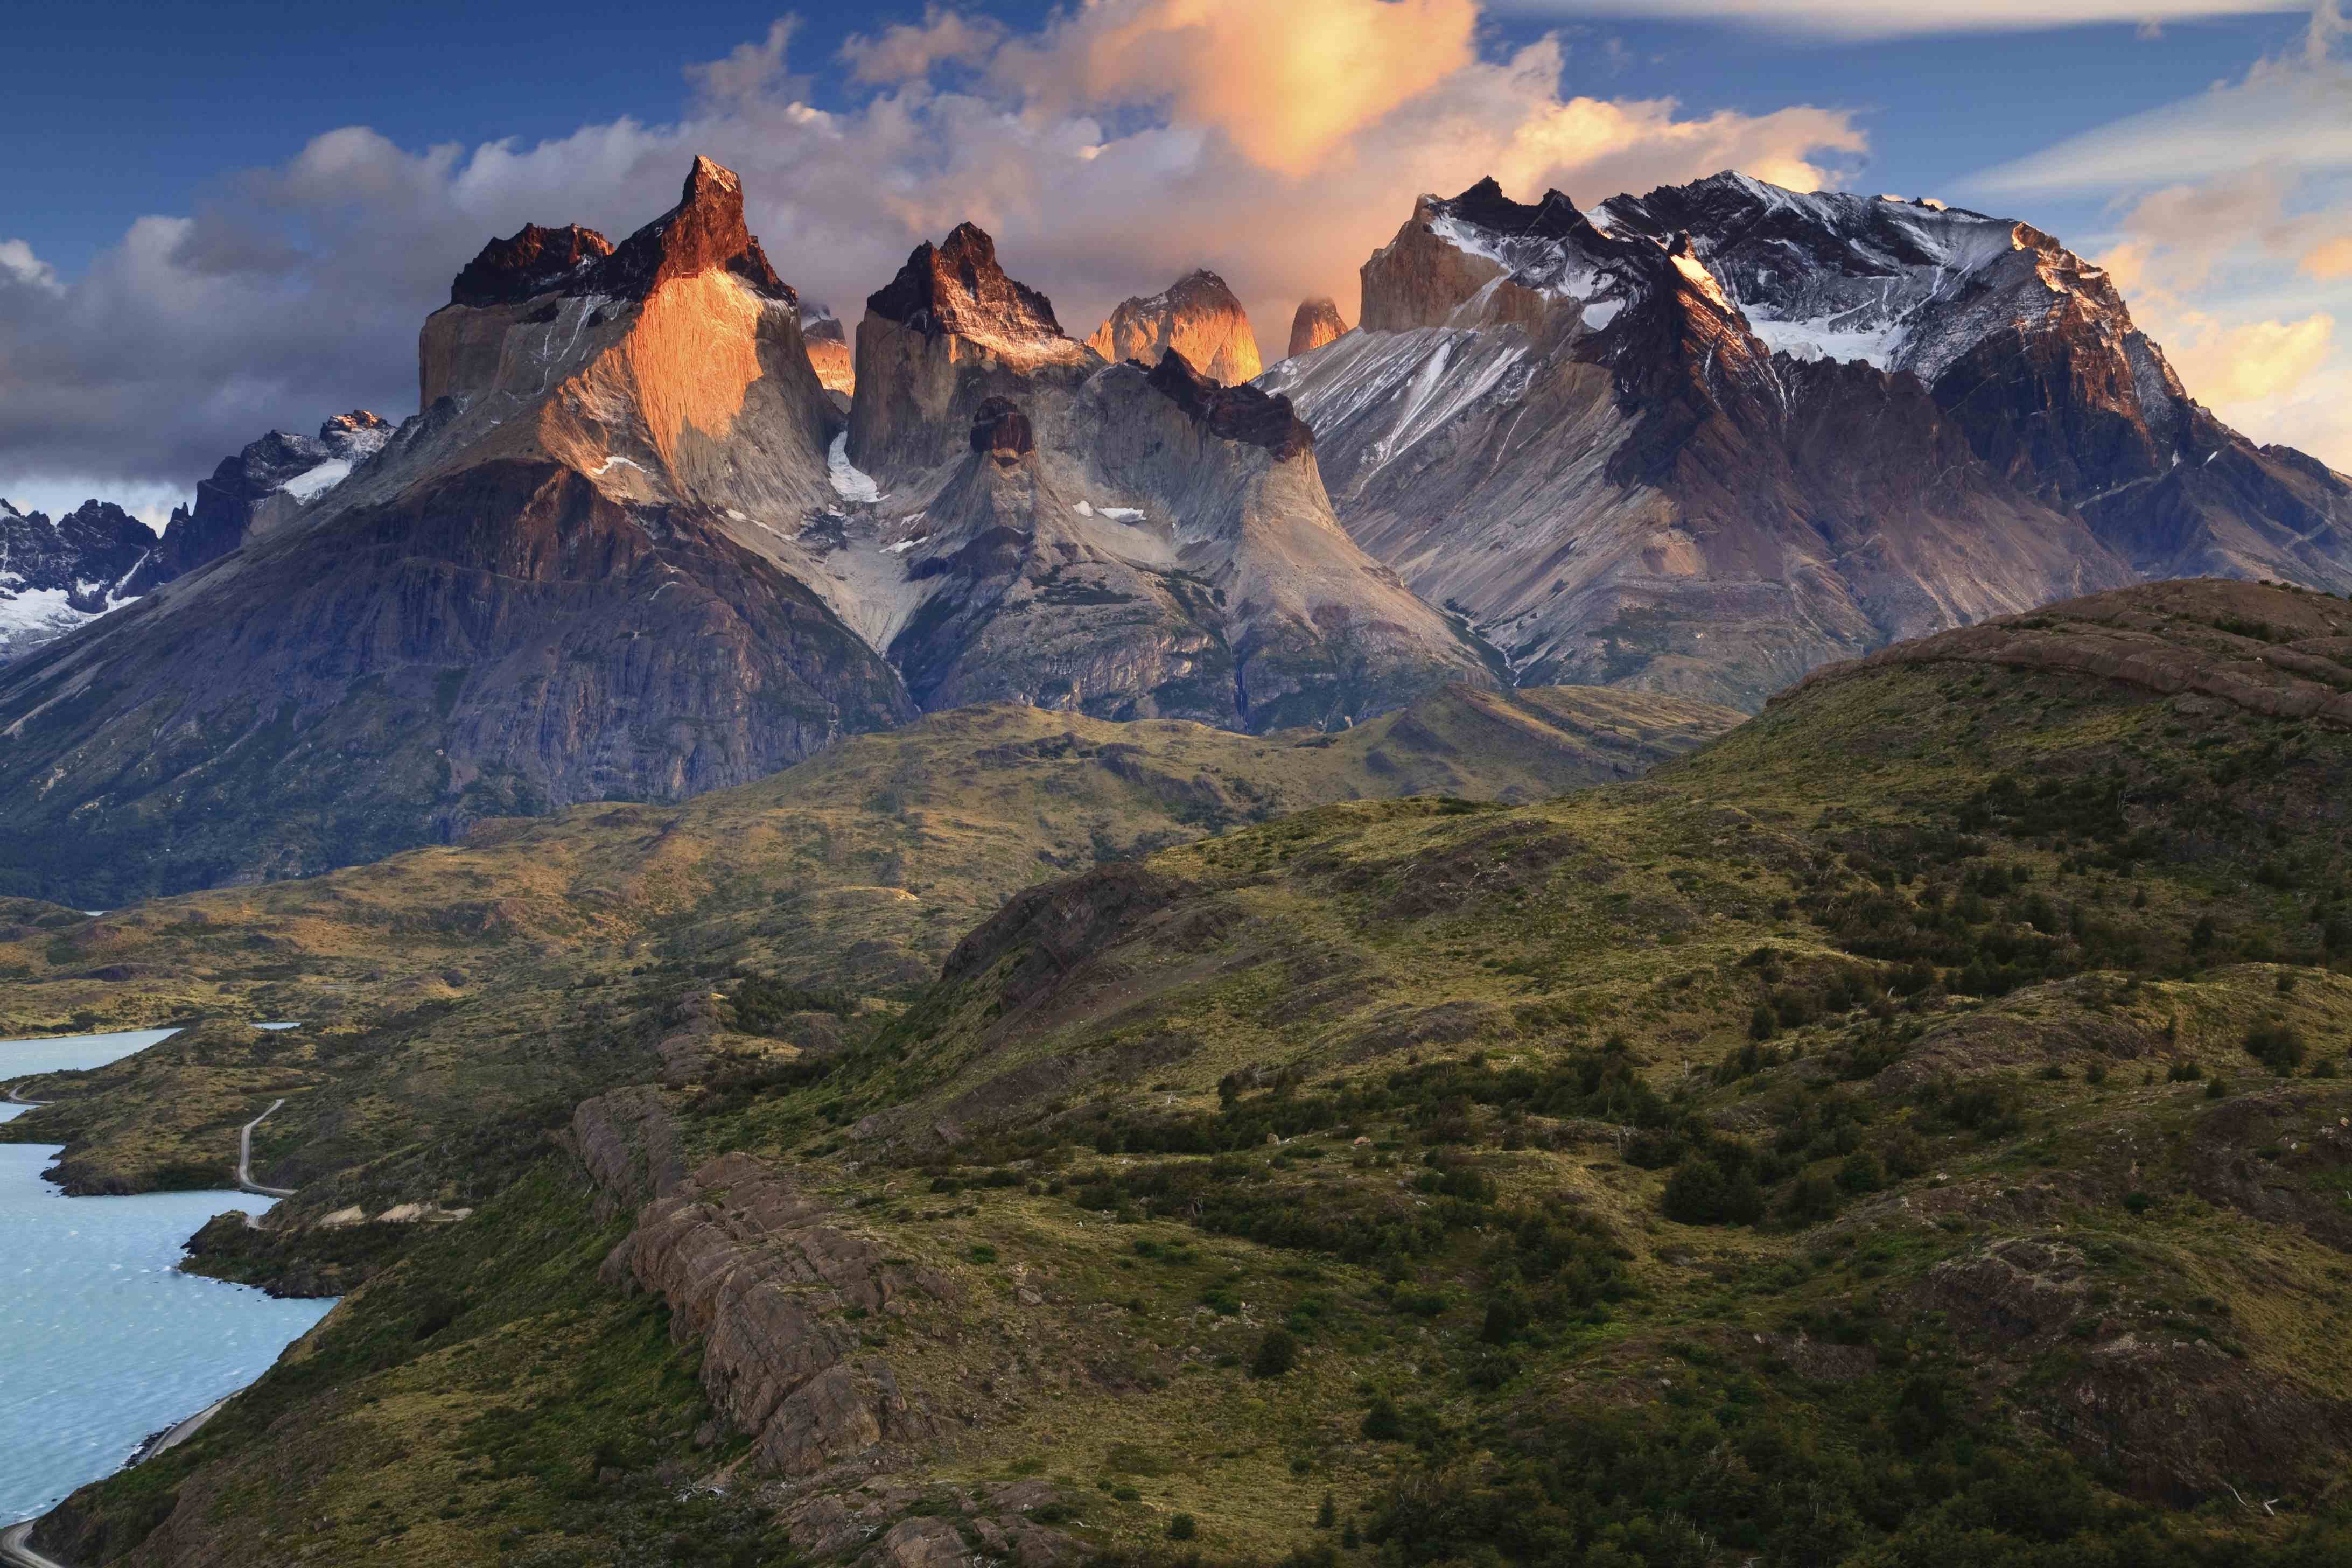 patagonia wallpapers, photos and desktop backgrounds up to 8K